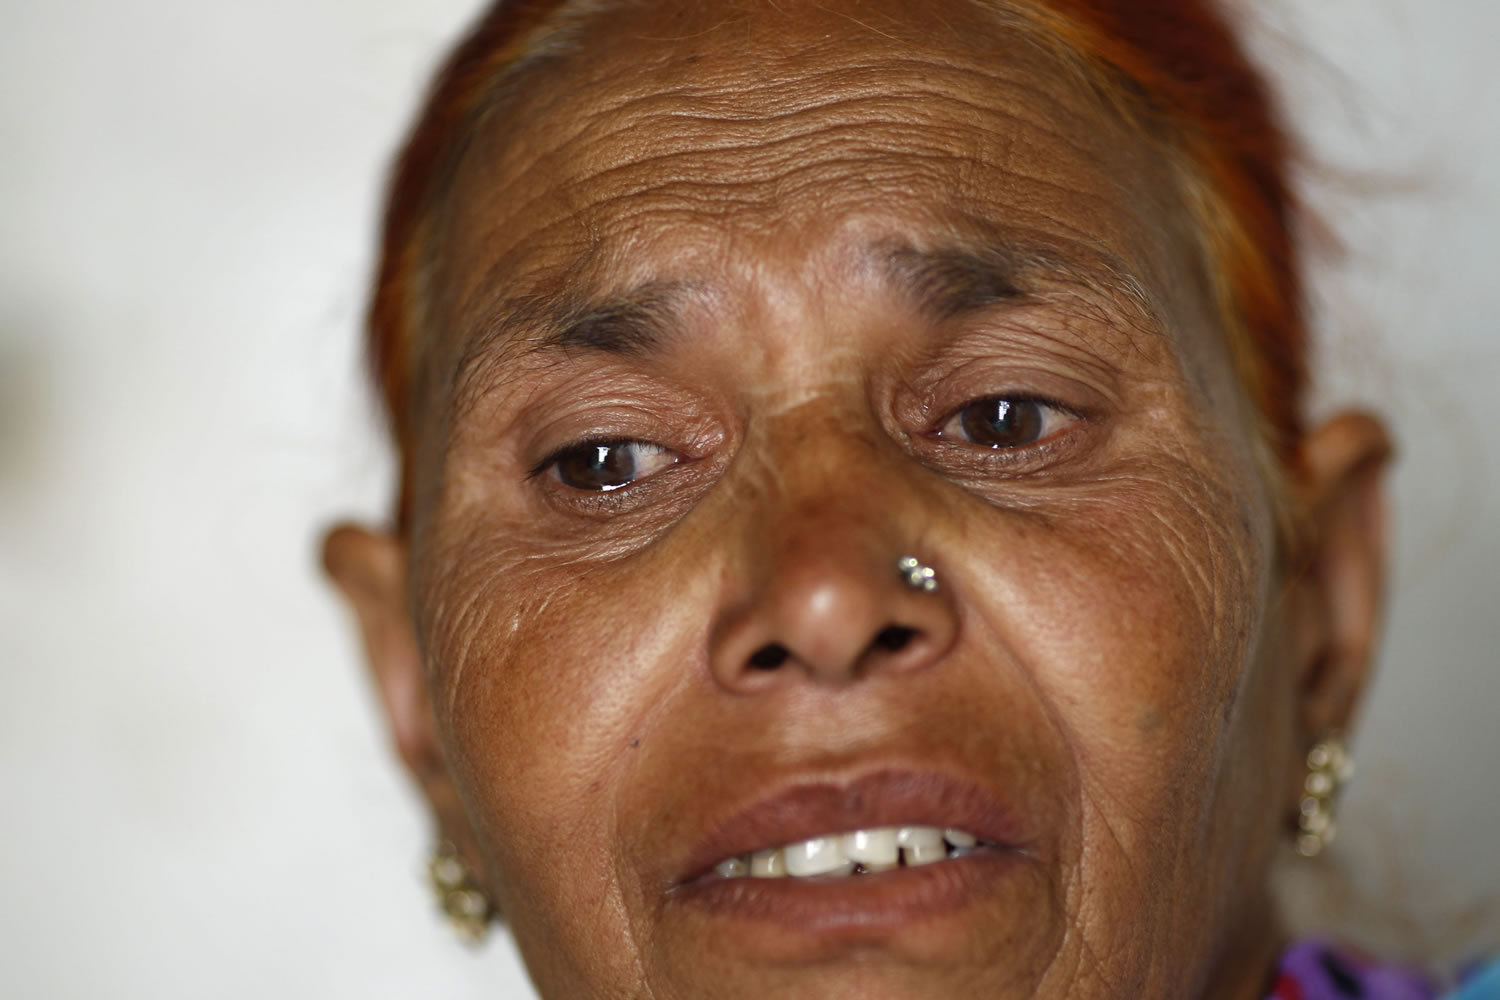 In this May 10, 2012 photo, Fatima Munshi, mother of Saroo, describes how she looked for her lost son over the years, at her home in Khandwa, India. Living in Australia, Saroo Brierley, 30, was reunited with his biological mother, Munshi, in February 2012, 25 years after an ill-fated train ride left him an orphan on the streets of Calcutta.